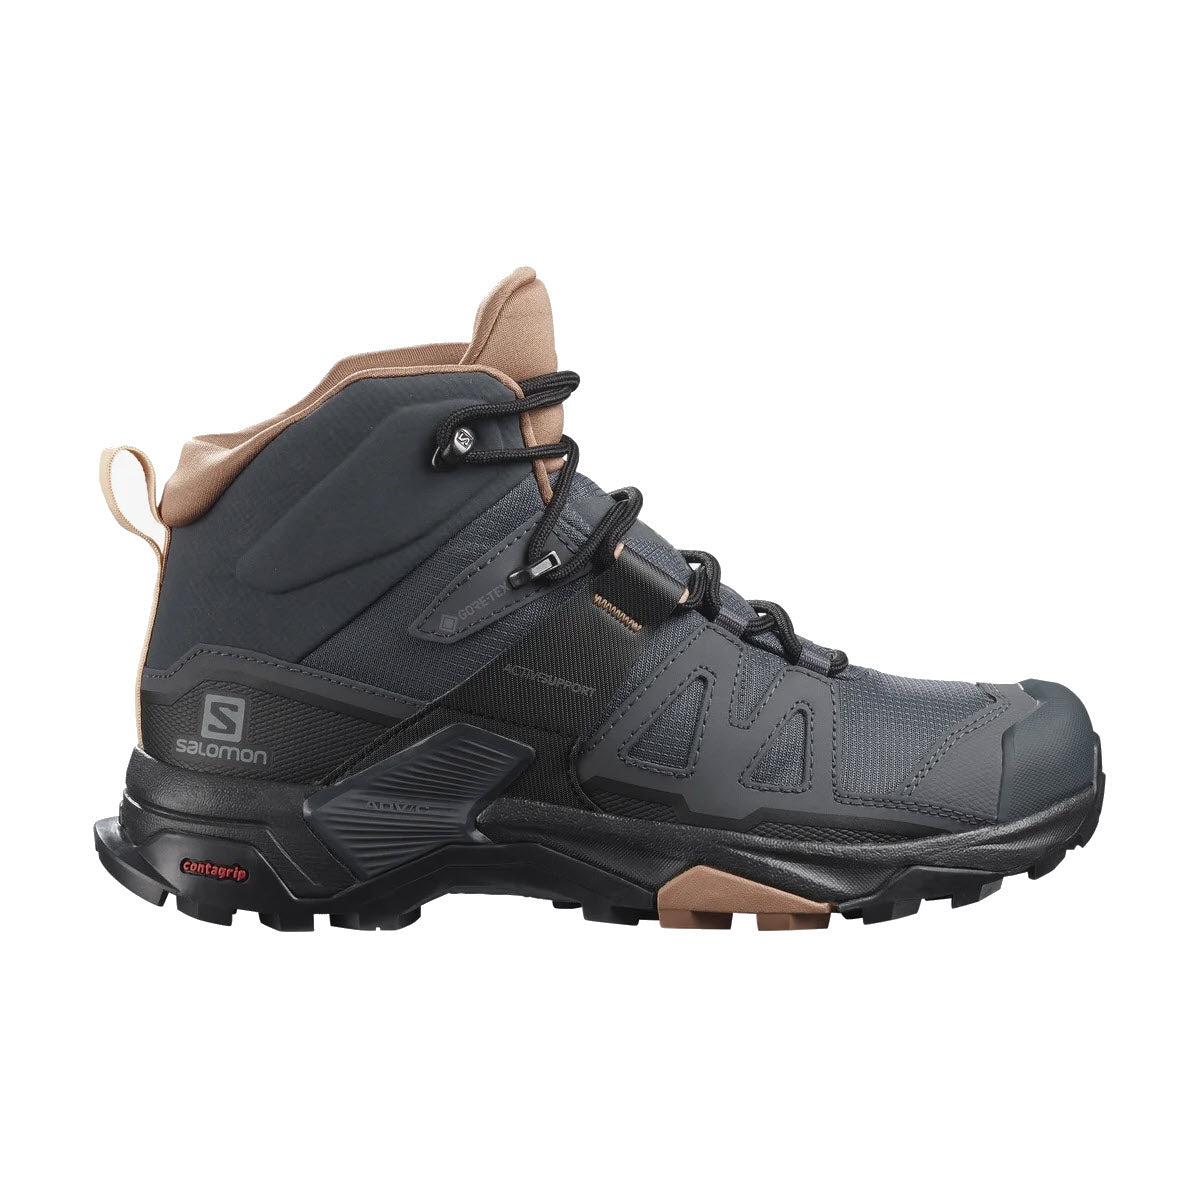 A single Salomon X Ultra 4 Mid GTX Ebony/Mocha Mousse/Almond Cream hiking boot with GORE-TEX protection, featuring gray and black colors with a tan accent, isolated on a white background.